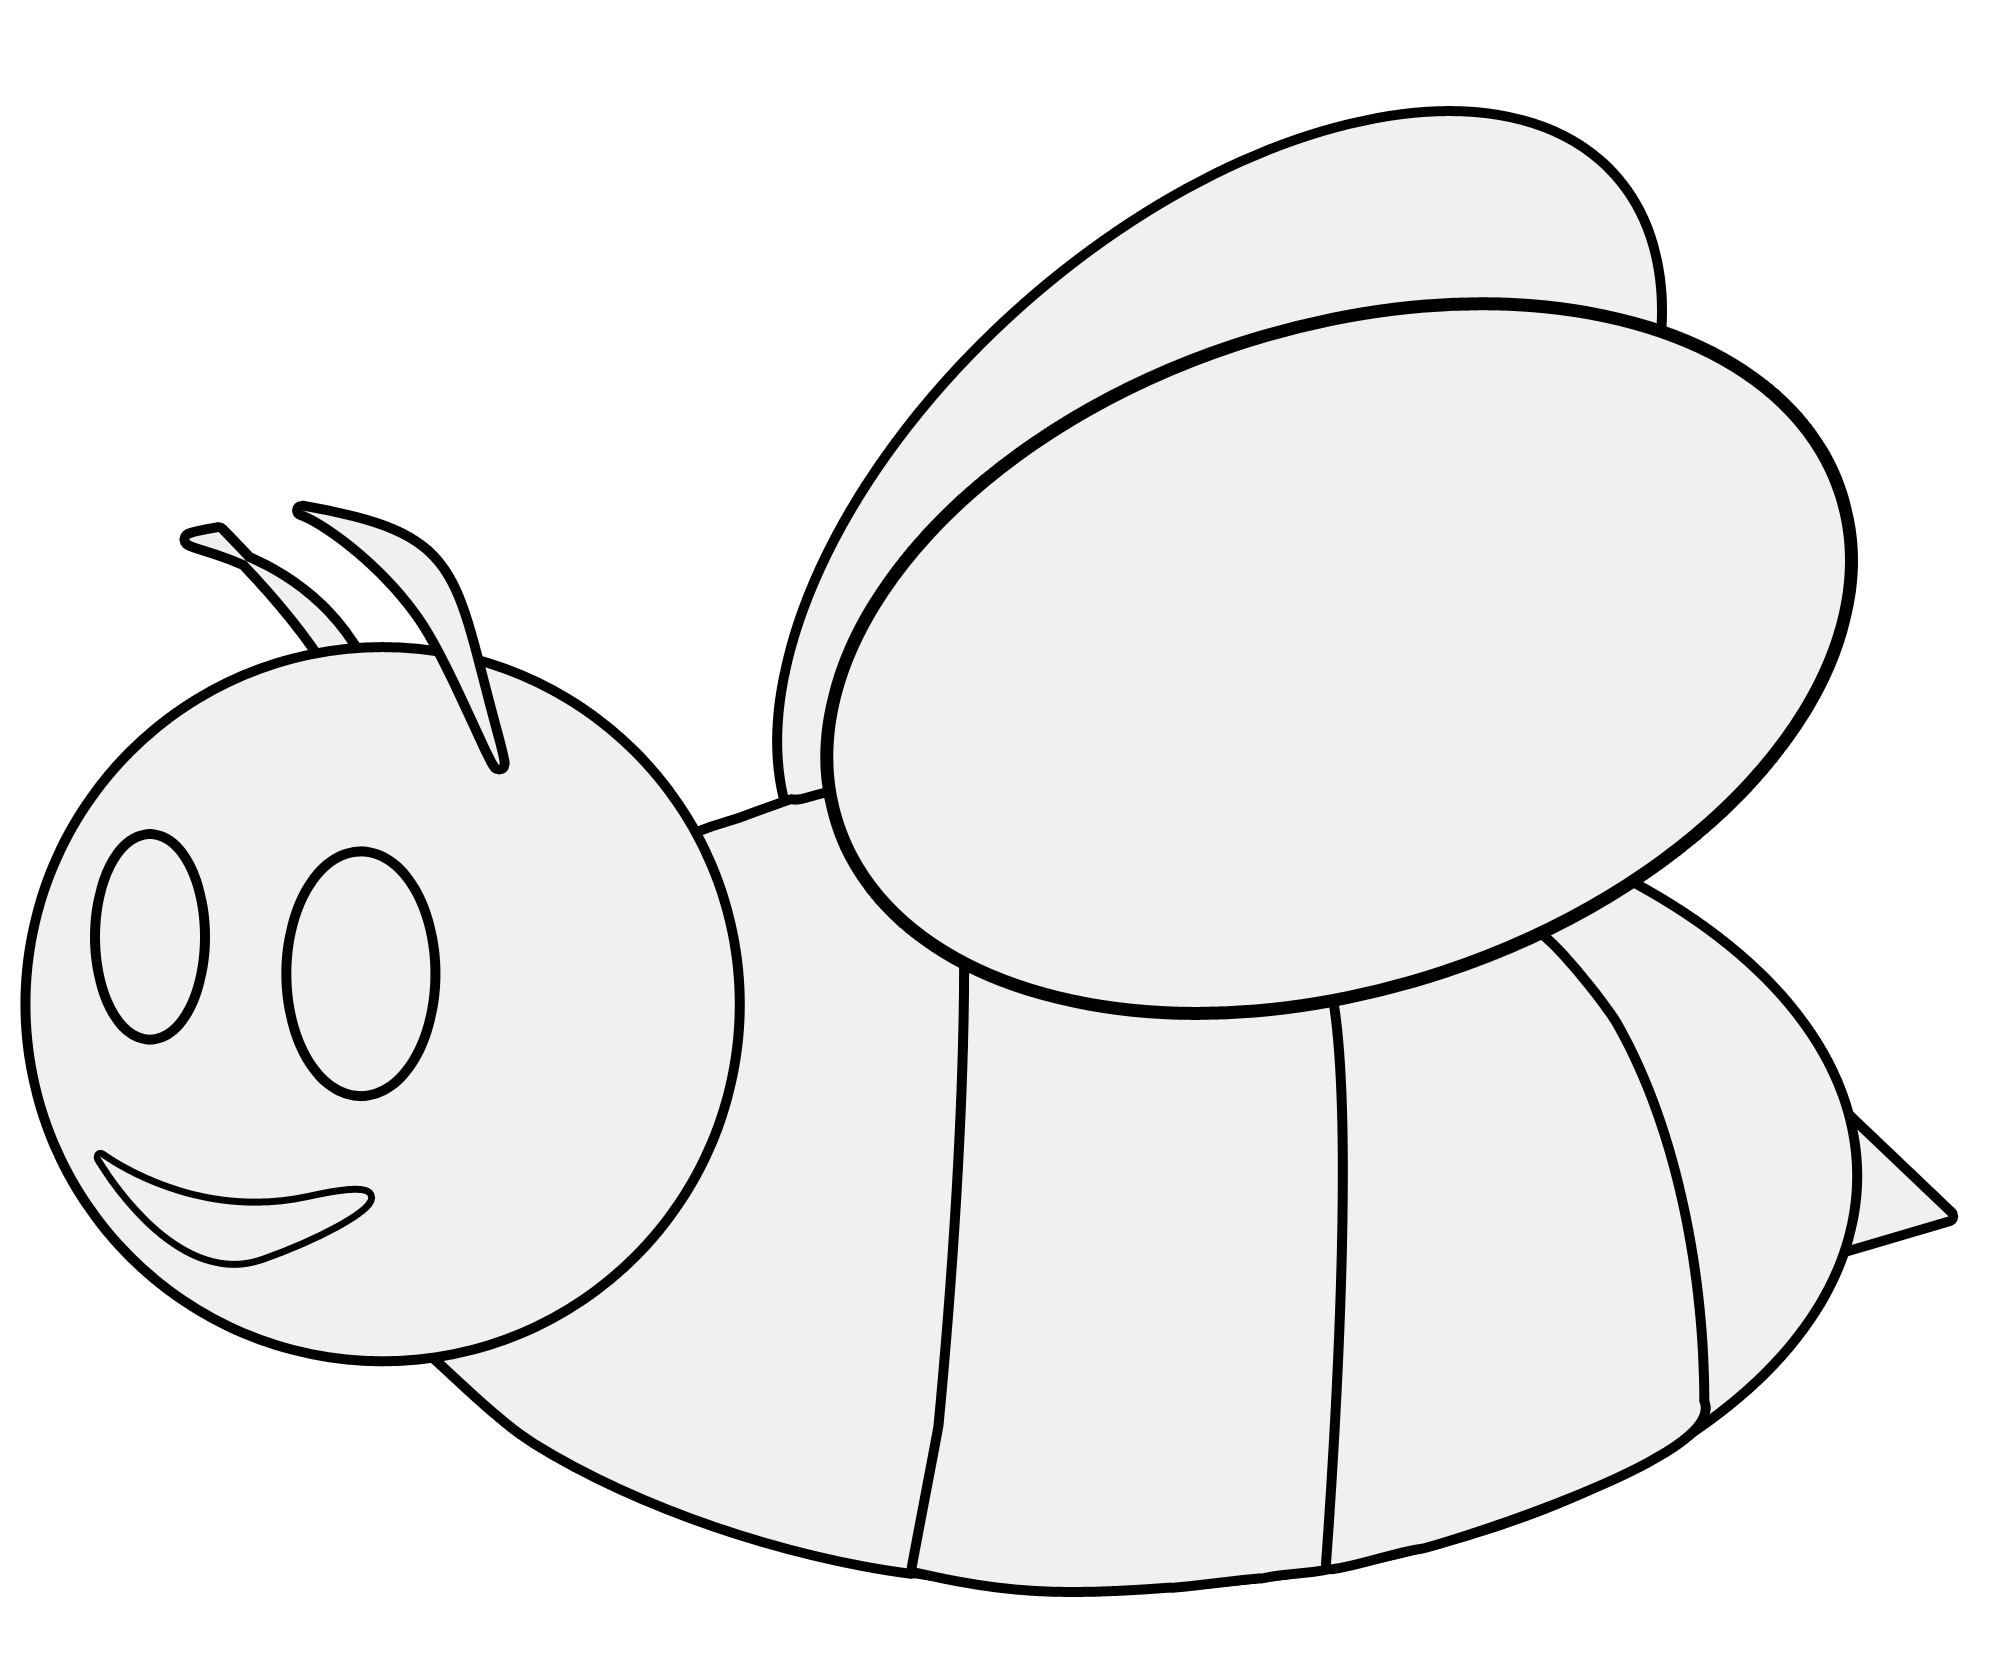 Bumble Bee Templates To Colour - Clipart library